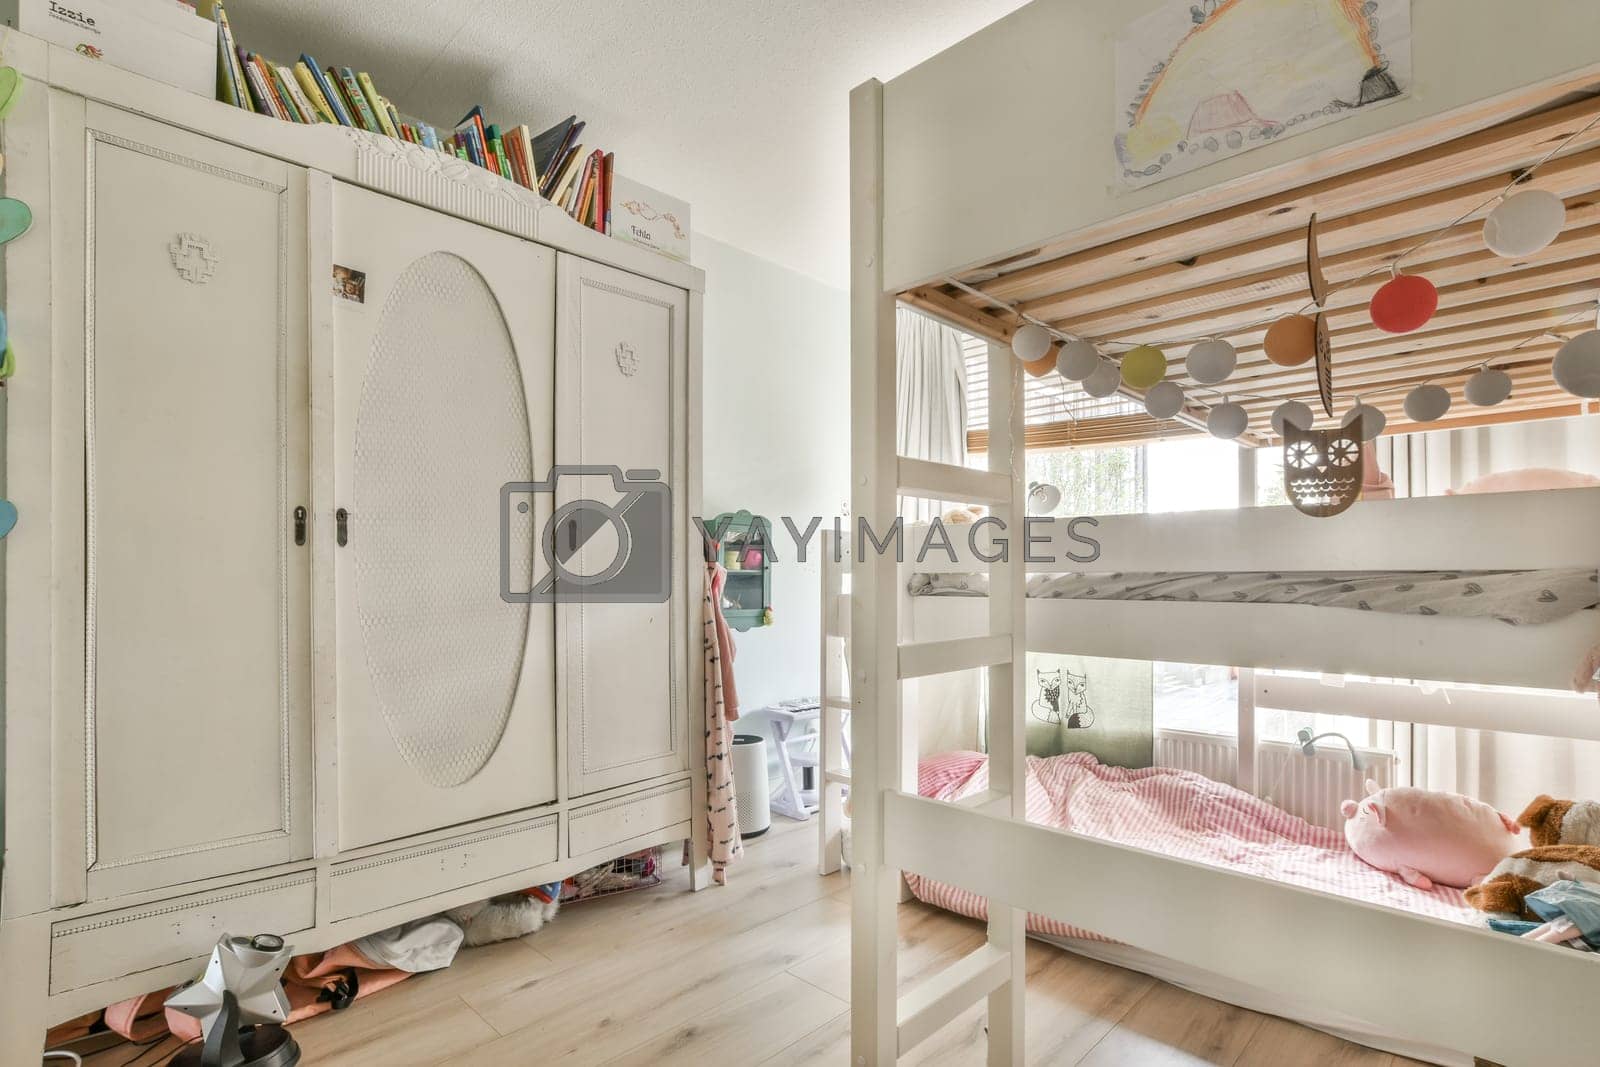 Royalty free image of a childrens bedroom with bunk beds and a wardrobe by casamedia